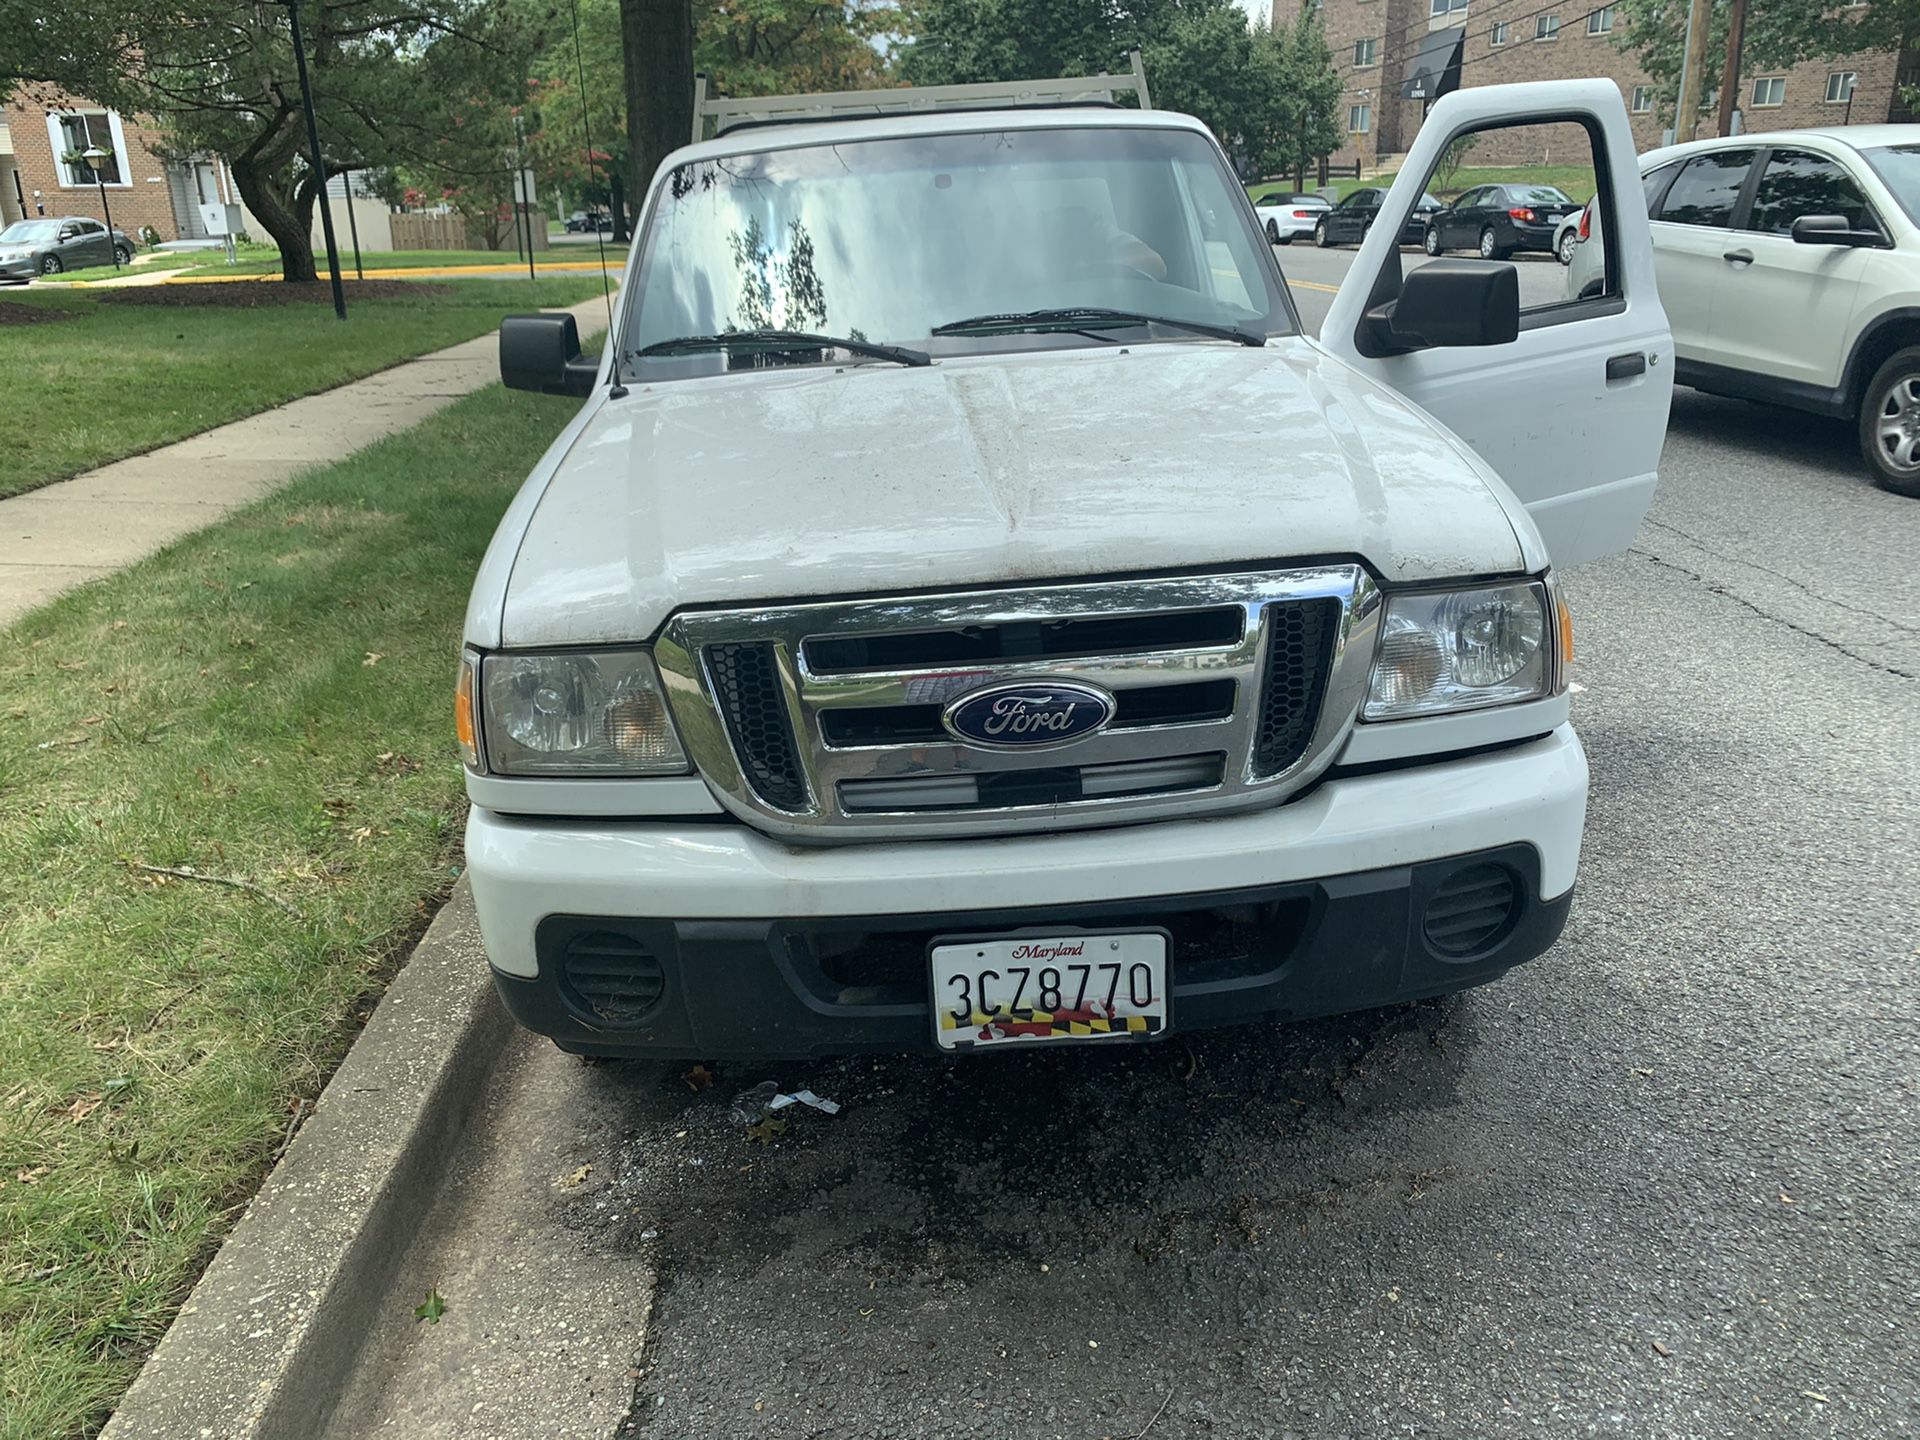 I sell Ford ranger its title is salvage it has a new engine with 73 thousand miles it is in perfect condition everything works very well